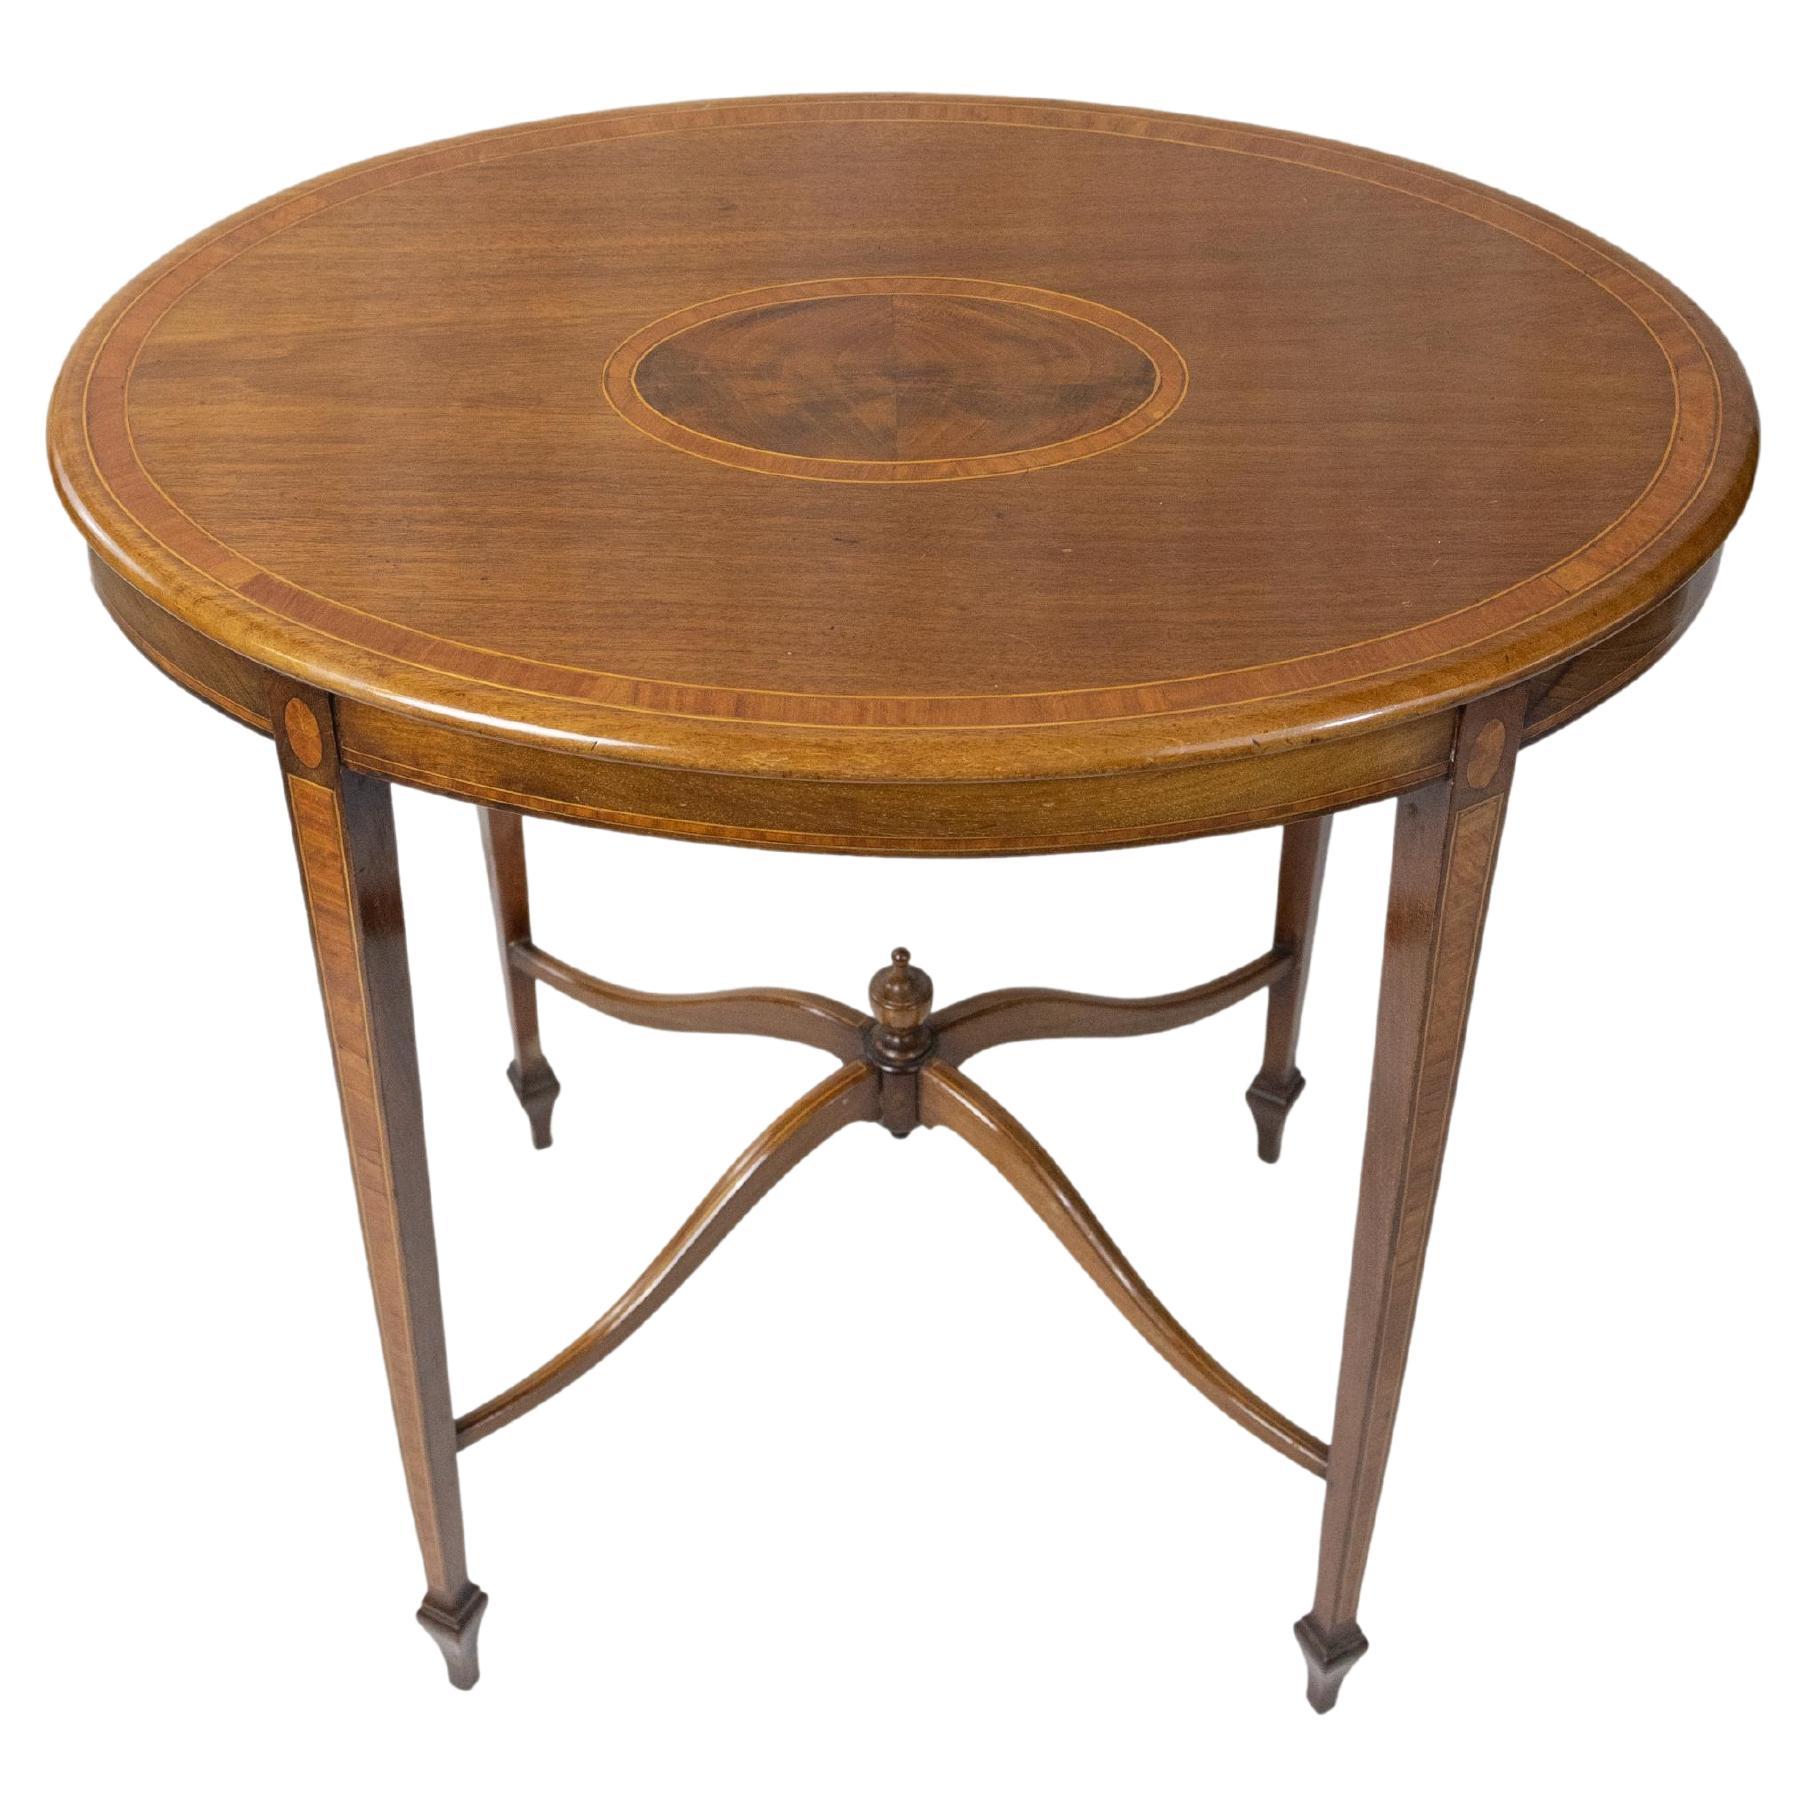 Figured Mahogany and Satinwood-Inlaid Oval Occasional Table, English, ca. 1890